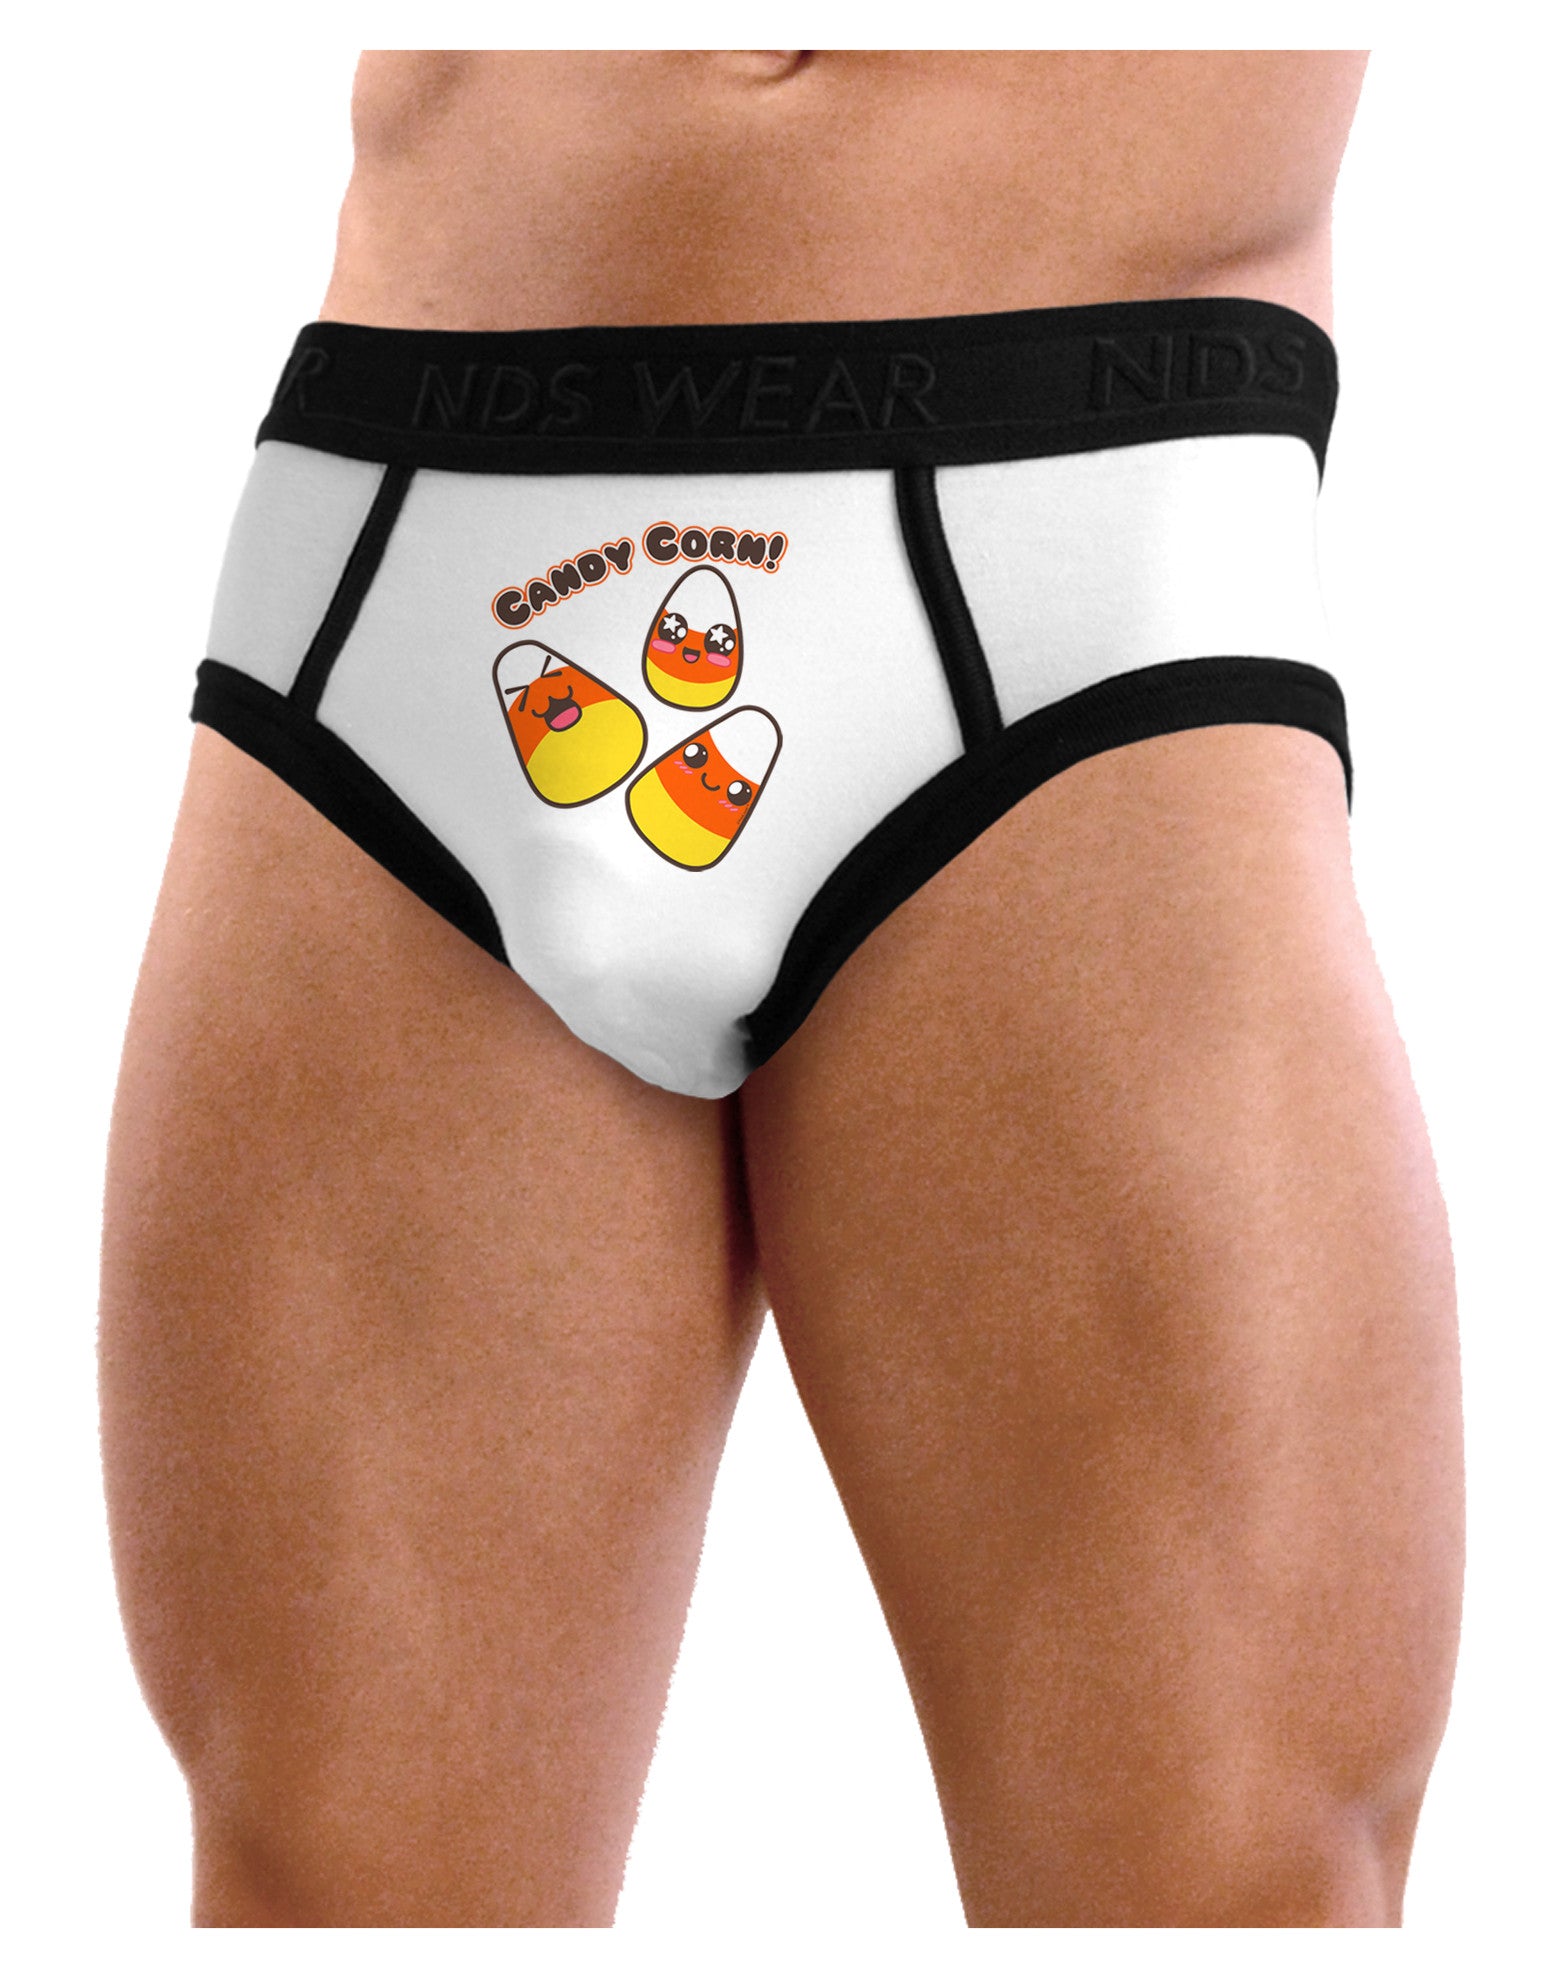  NDS Wear Cute Kawaii Candy Corn Halloween Mens Cotton Trunk  Underwear White - Small : Clothing, Shoes & Jewelry